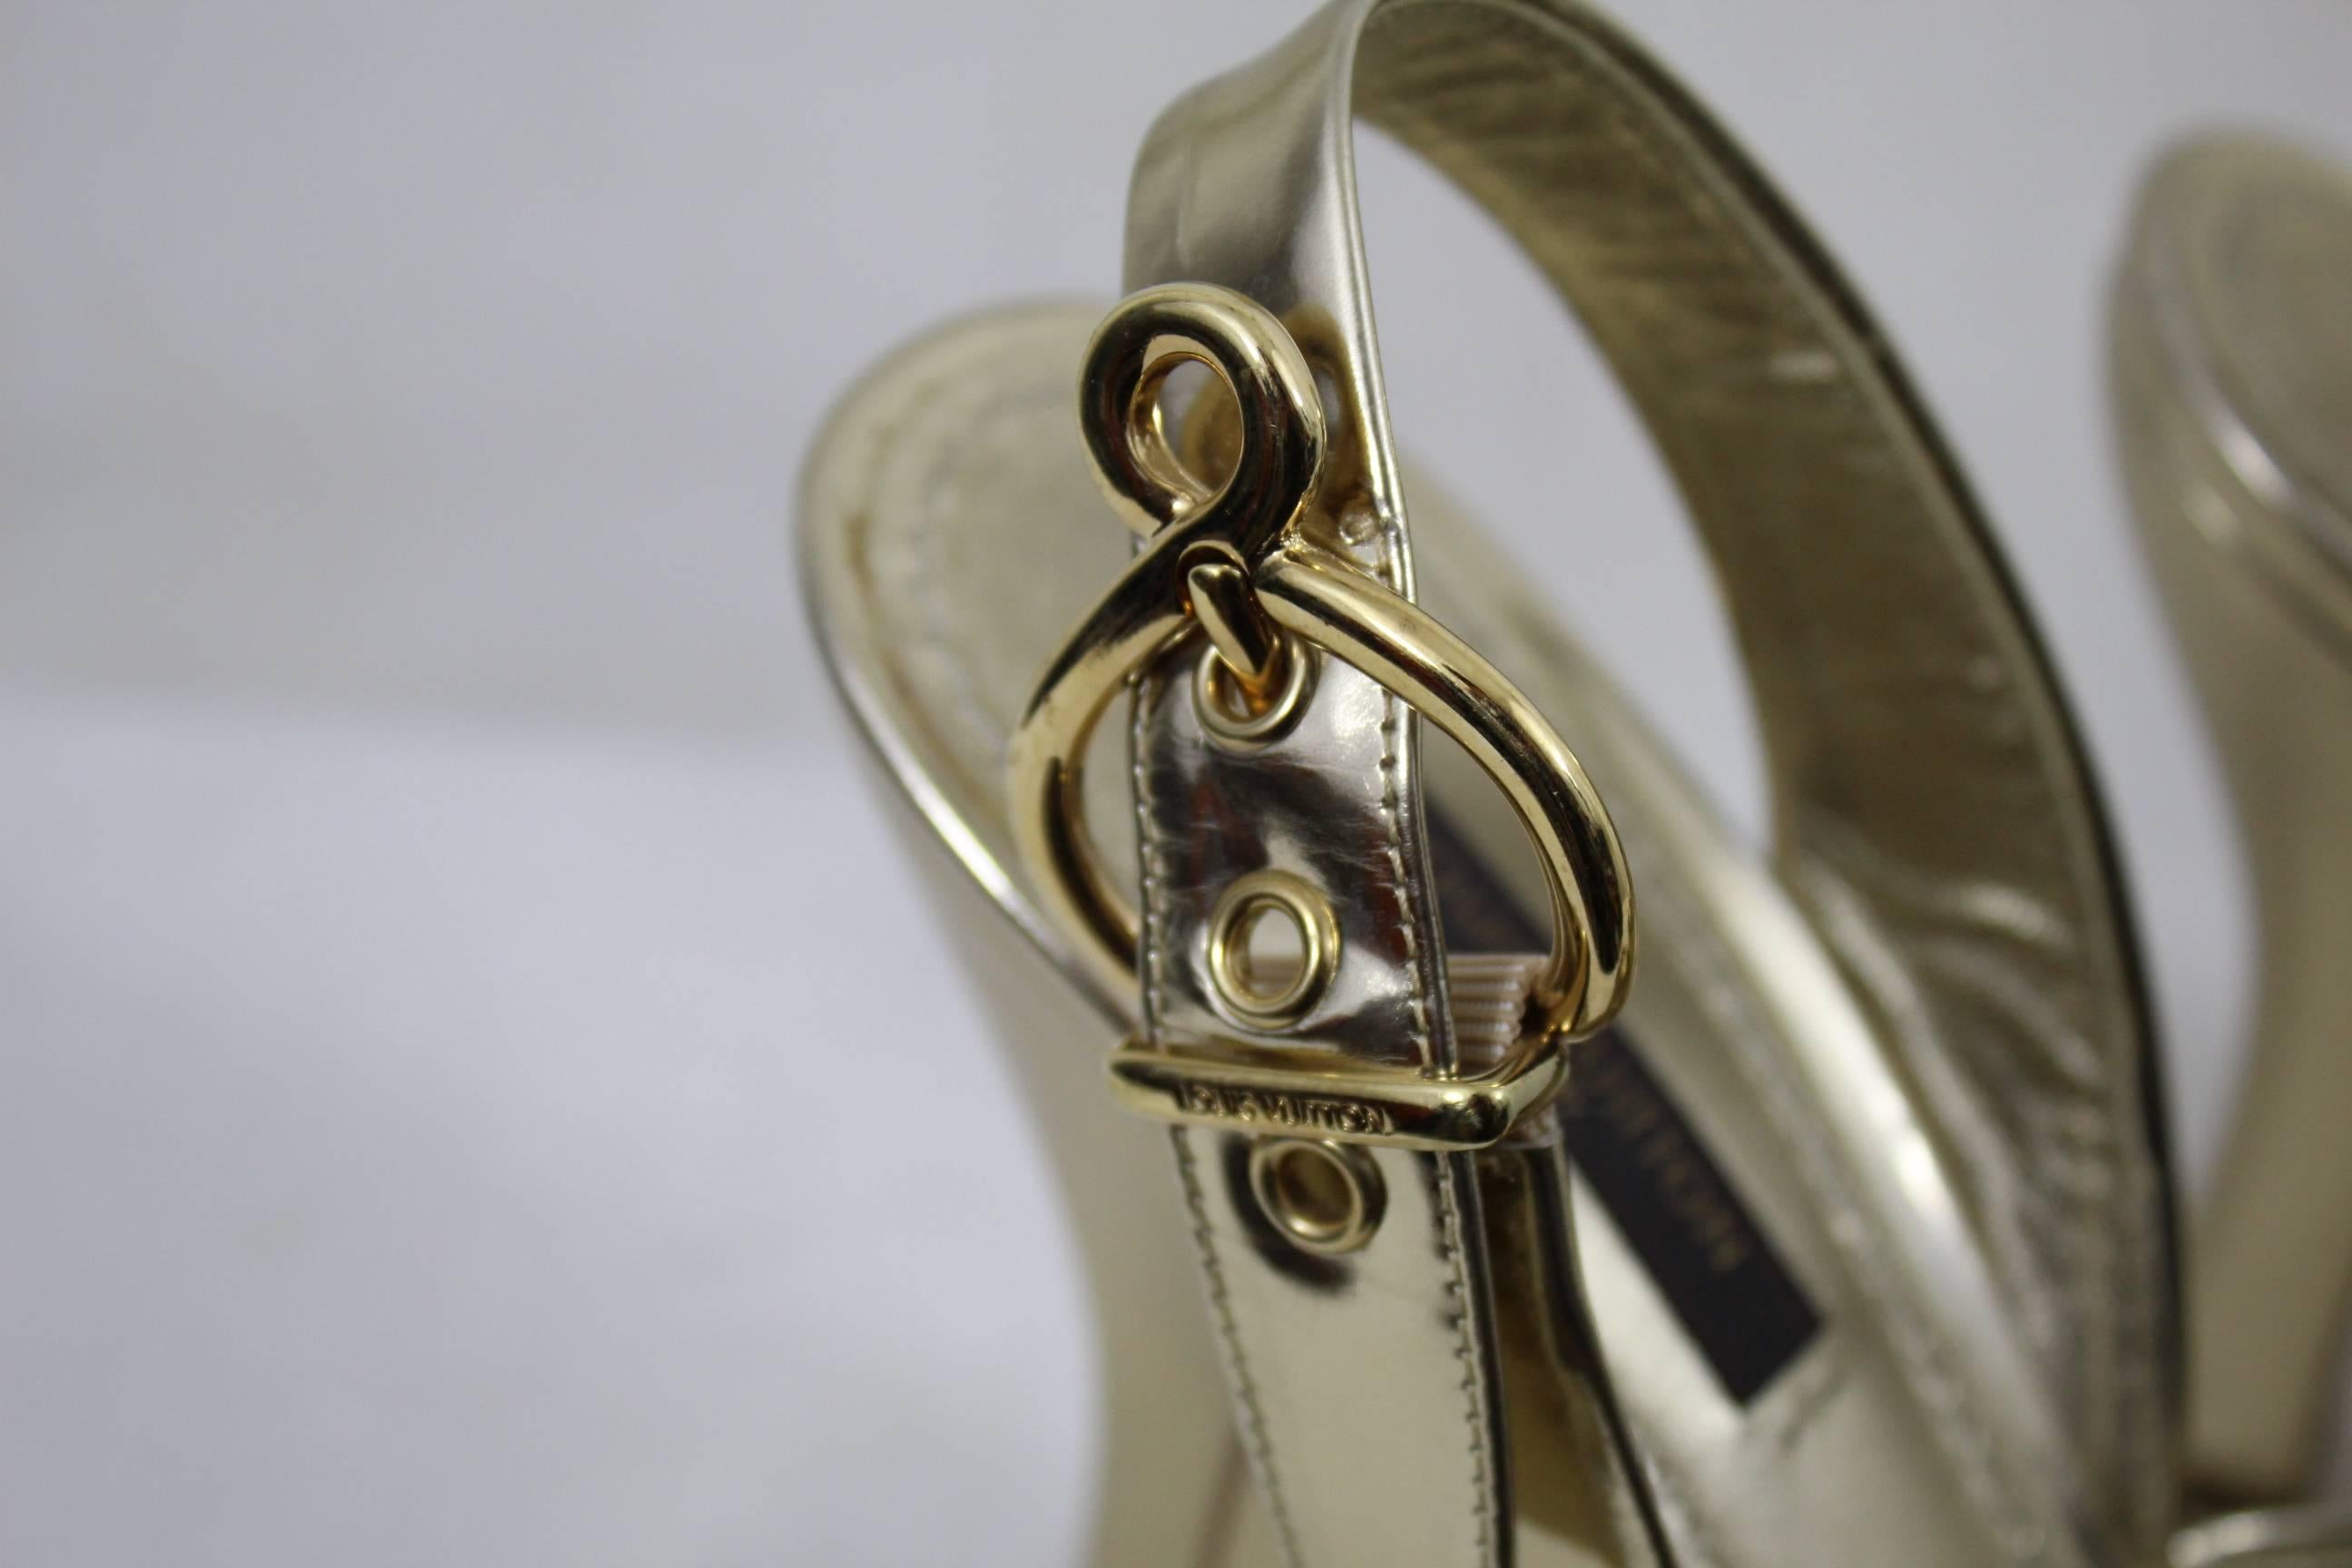 Amazing shoes from louis Vuitton in golden patented leather and golden buckle.

Good condition however they present some sgns of wear (please see photos)

Really nice and stunning for an special event

